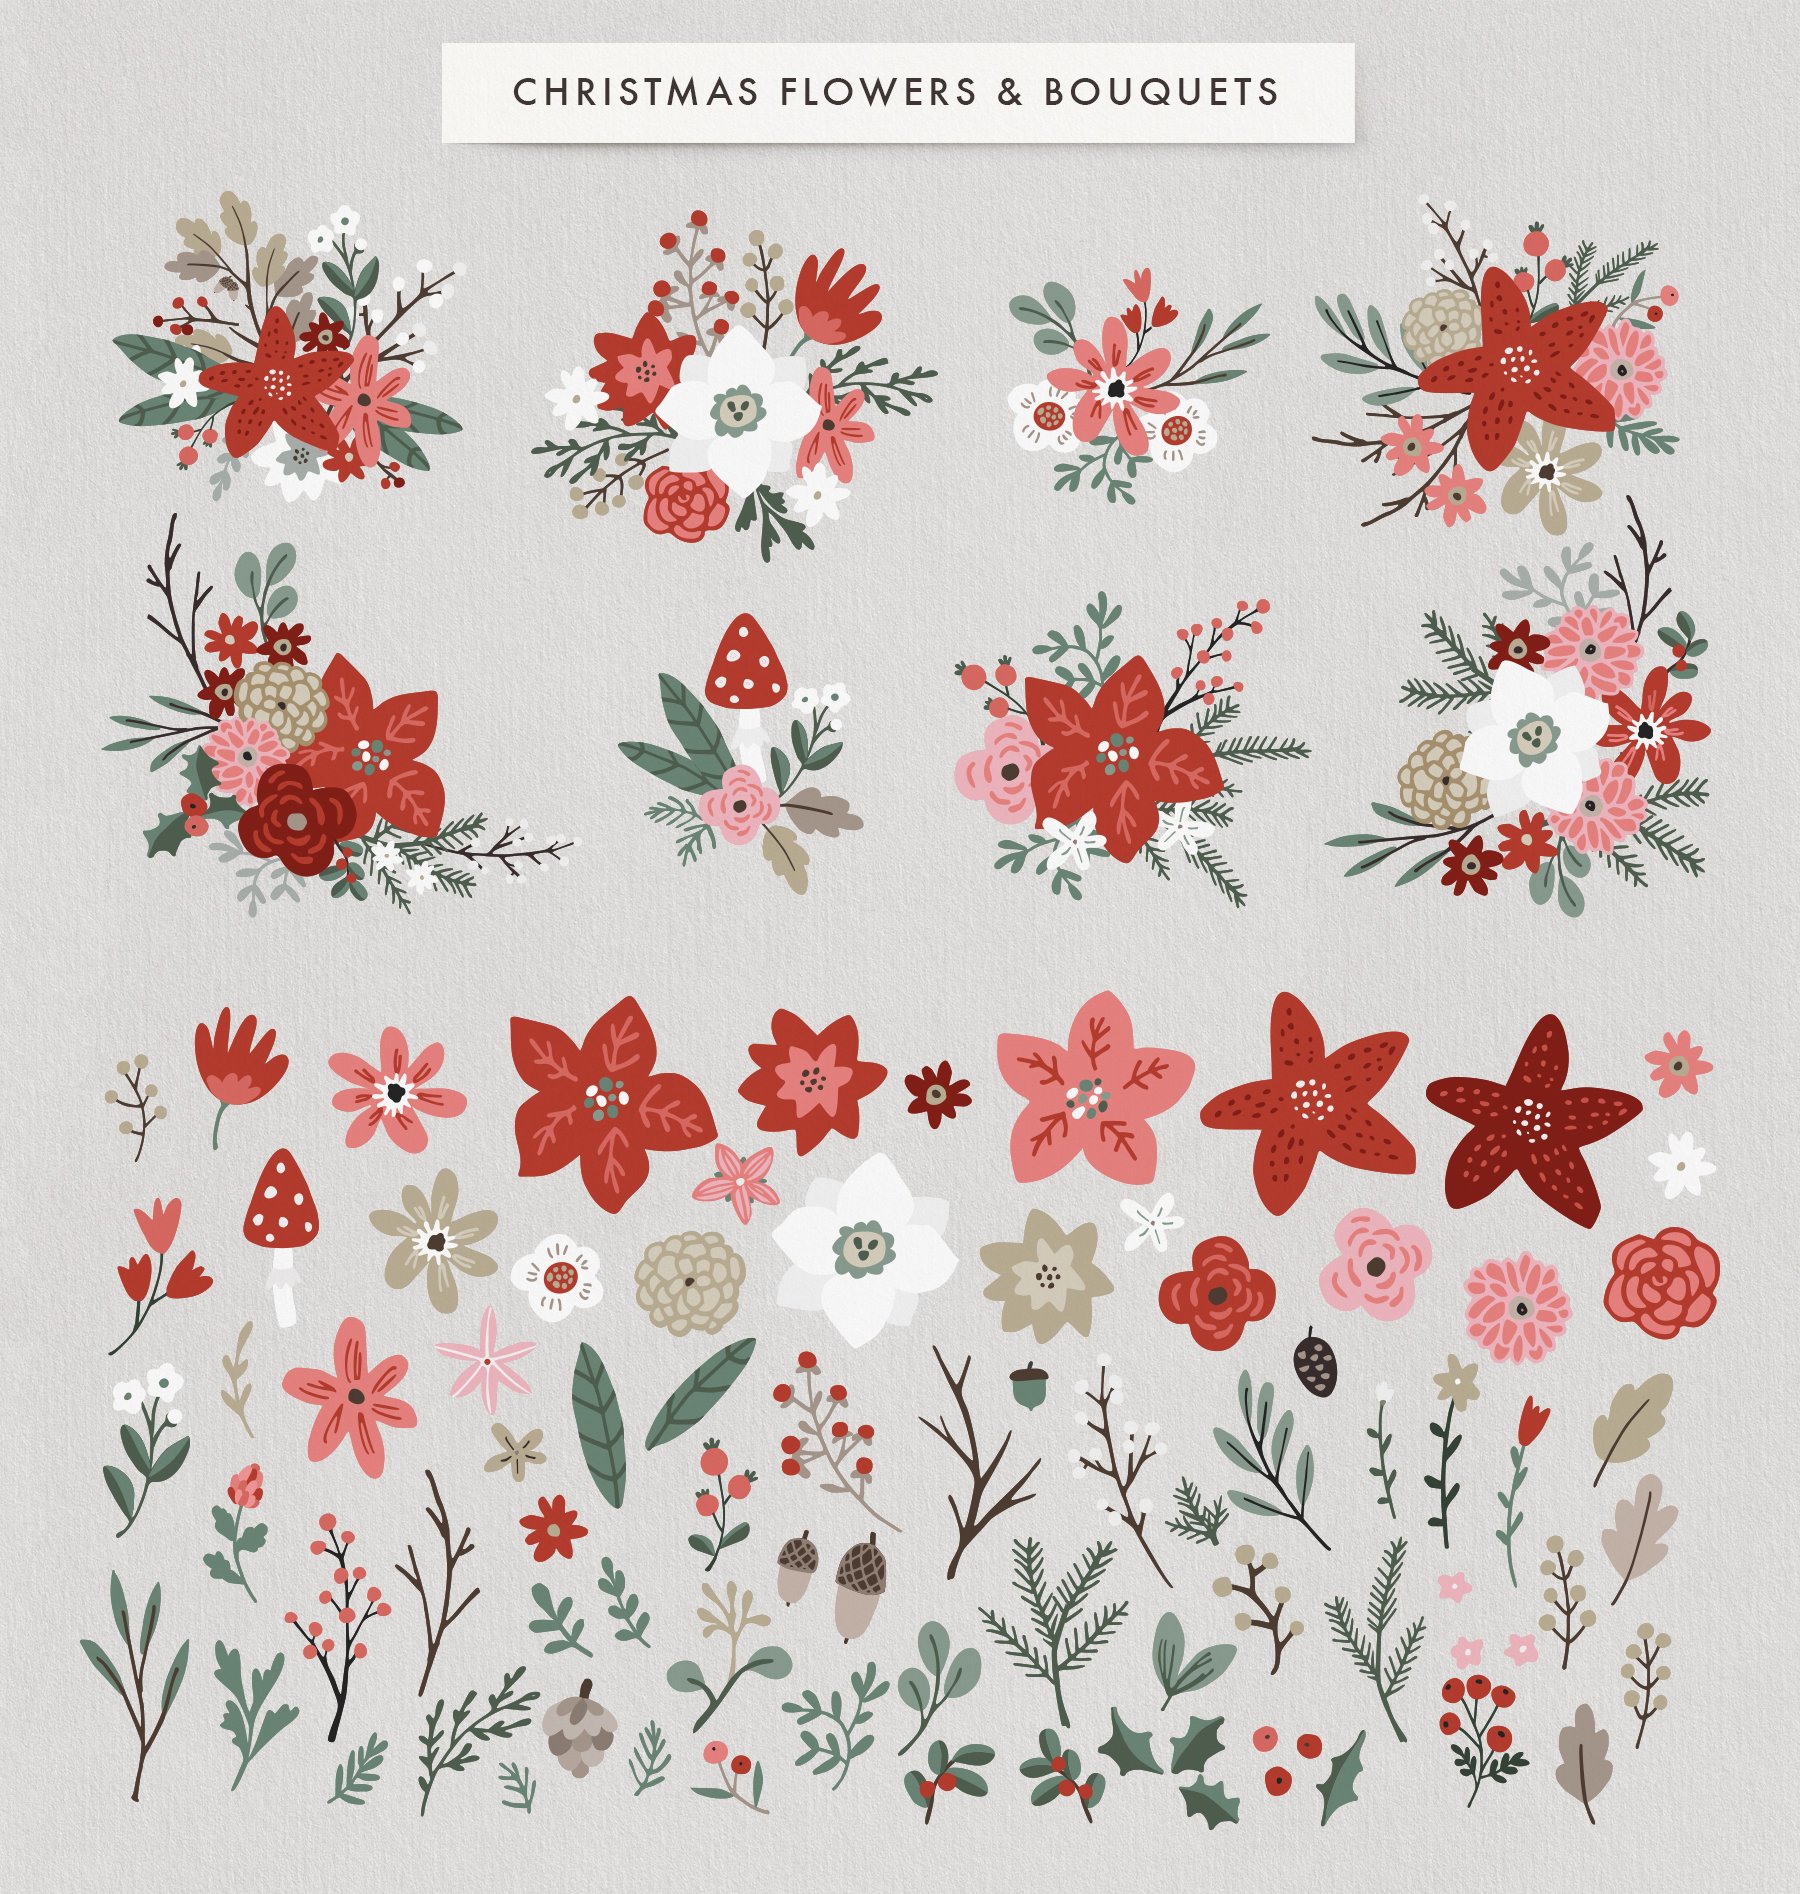 Bright Christmas Illustrations and Patterns Set